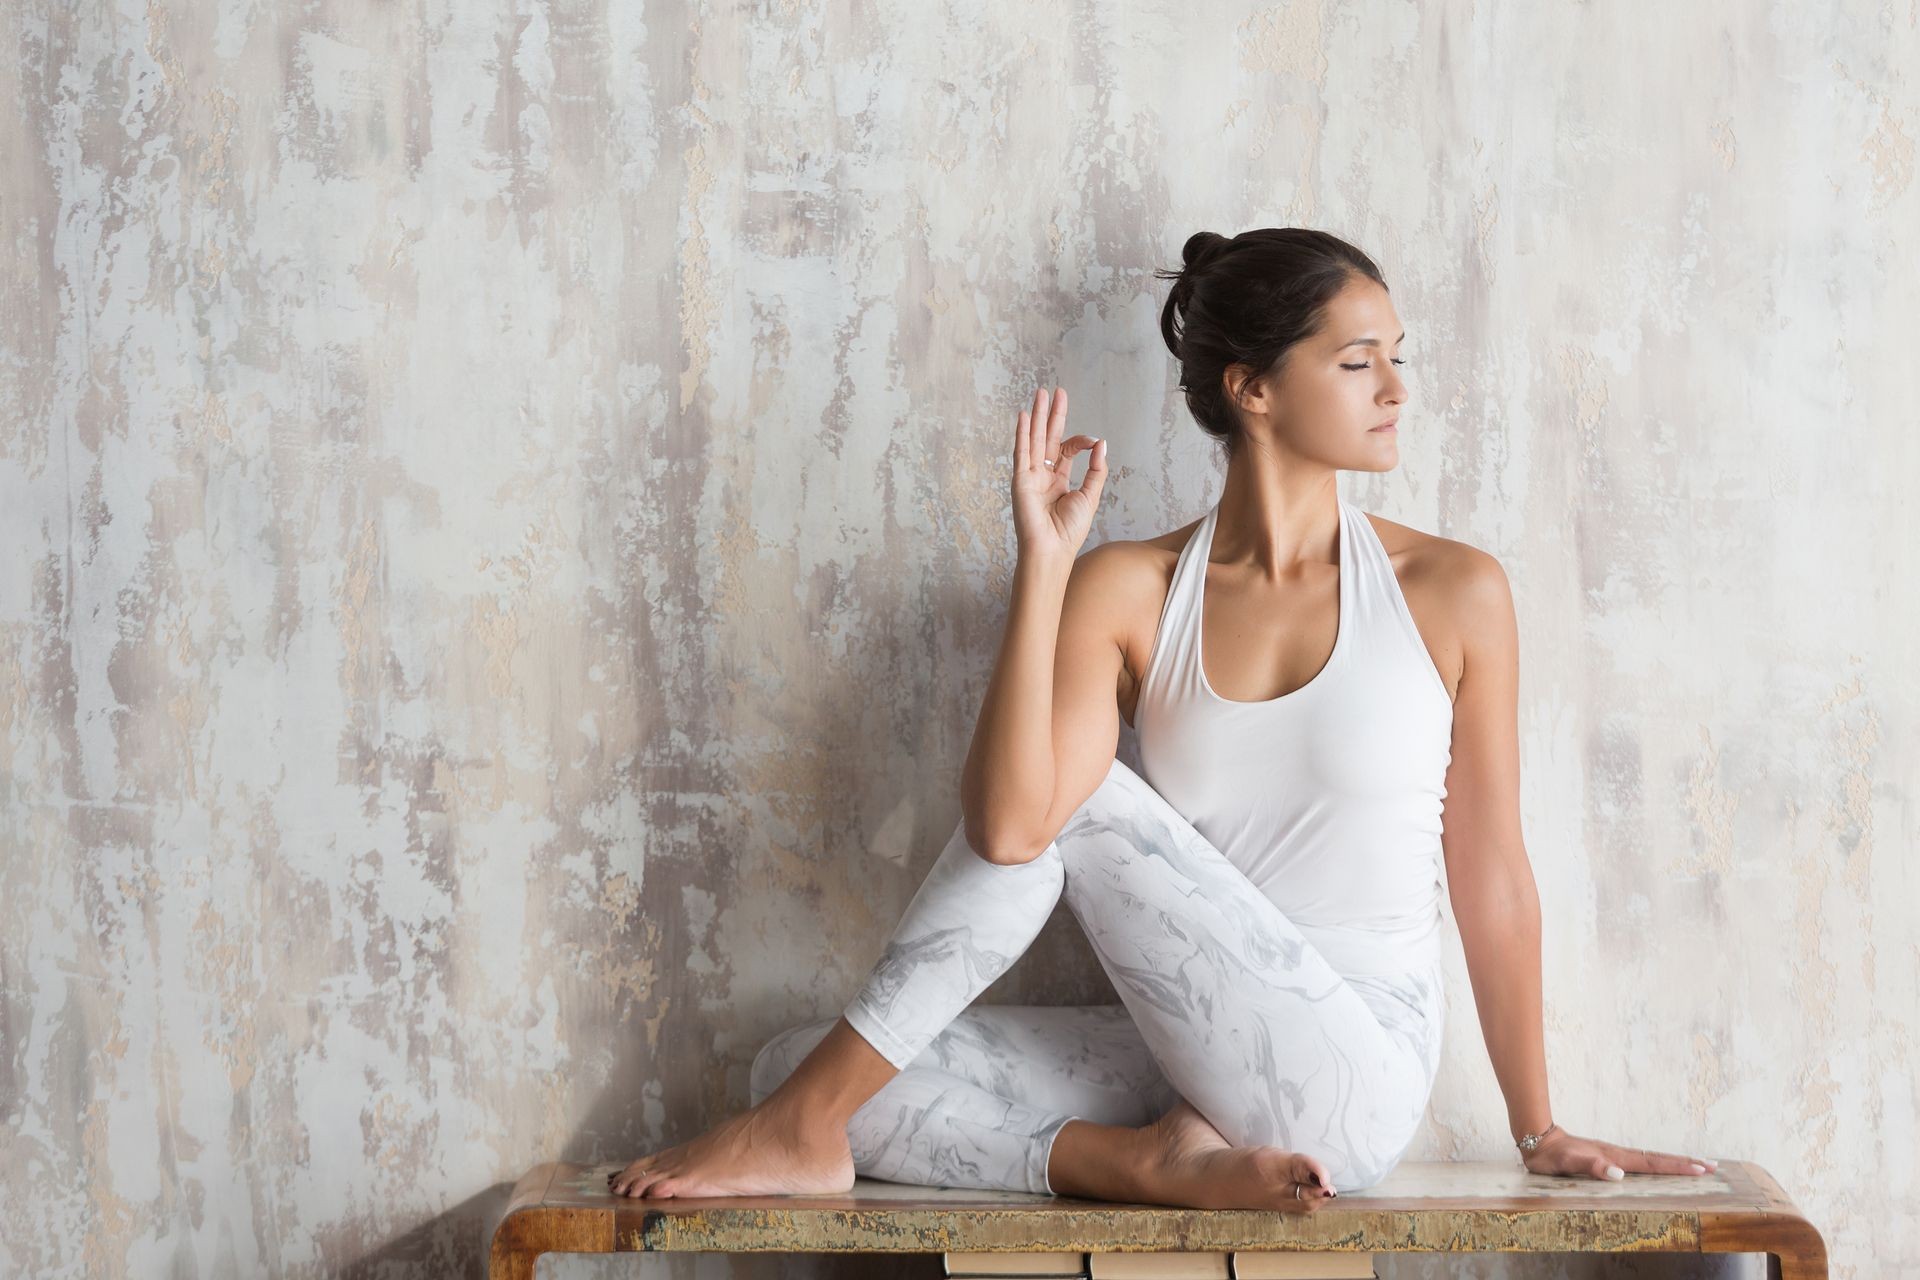 Slim beautiful young woman yoga instructor doing asana sitting on a vintage console against the background of a concrete wall. Yoga concept and take care of yourself